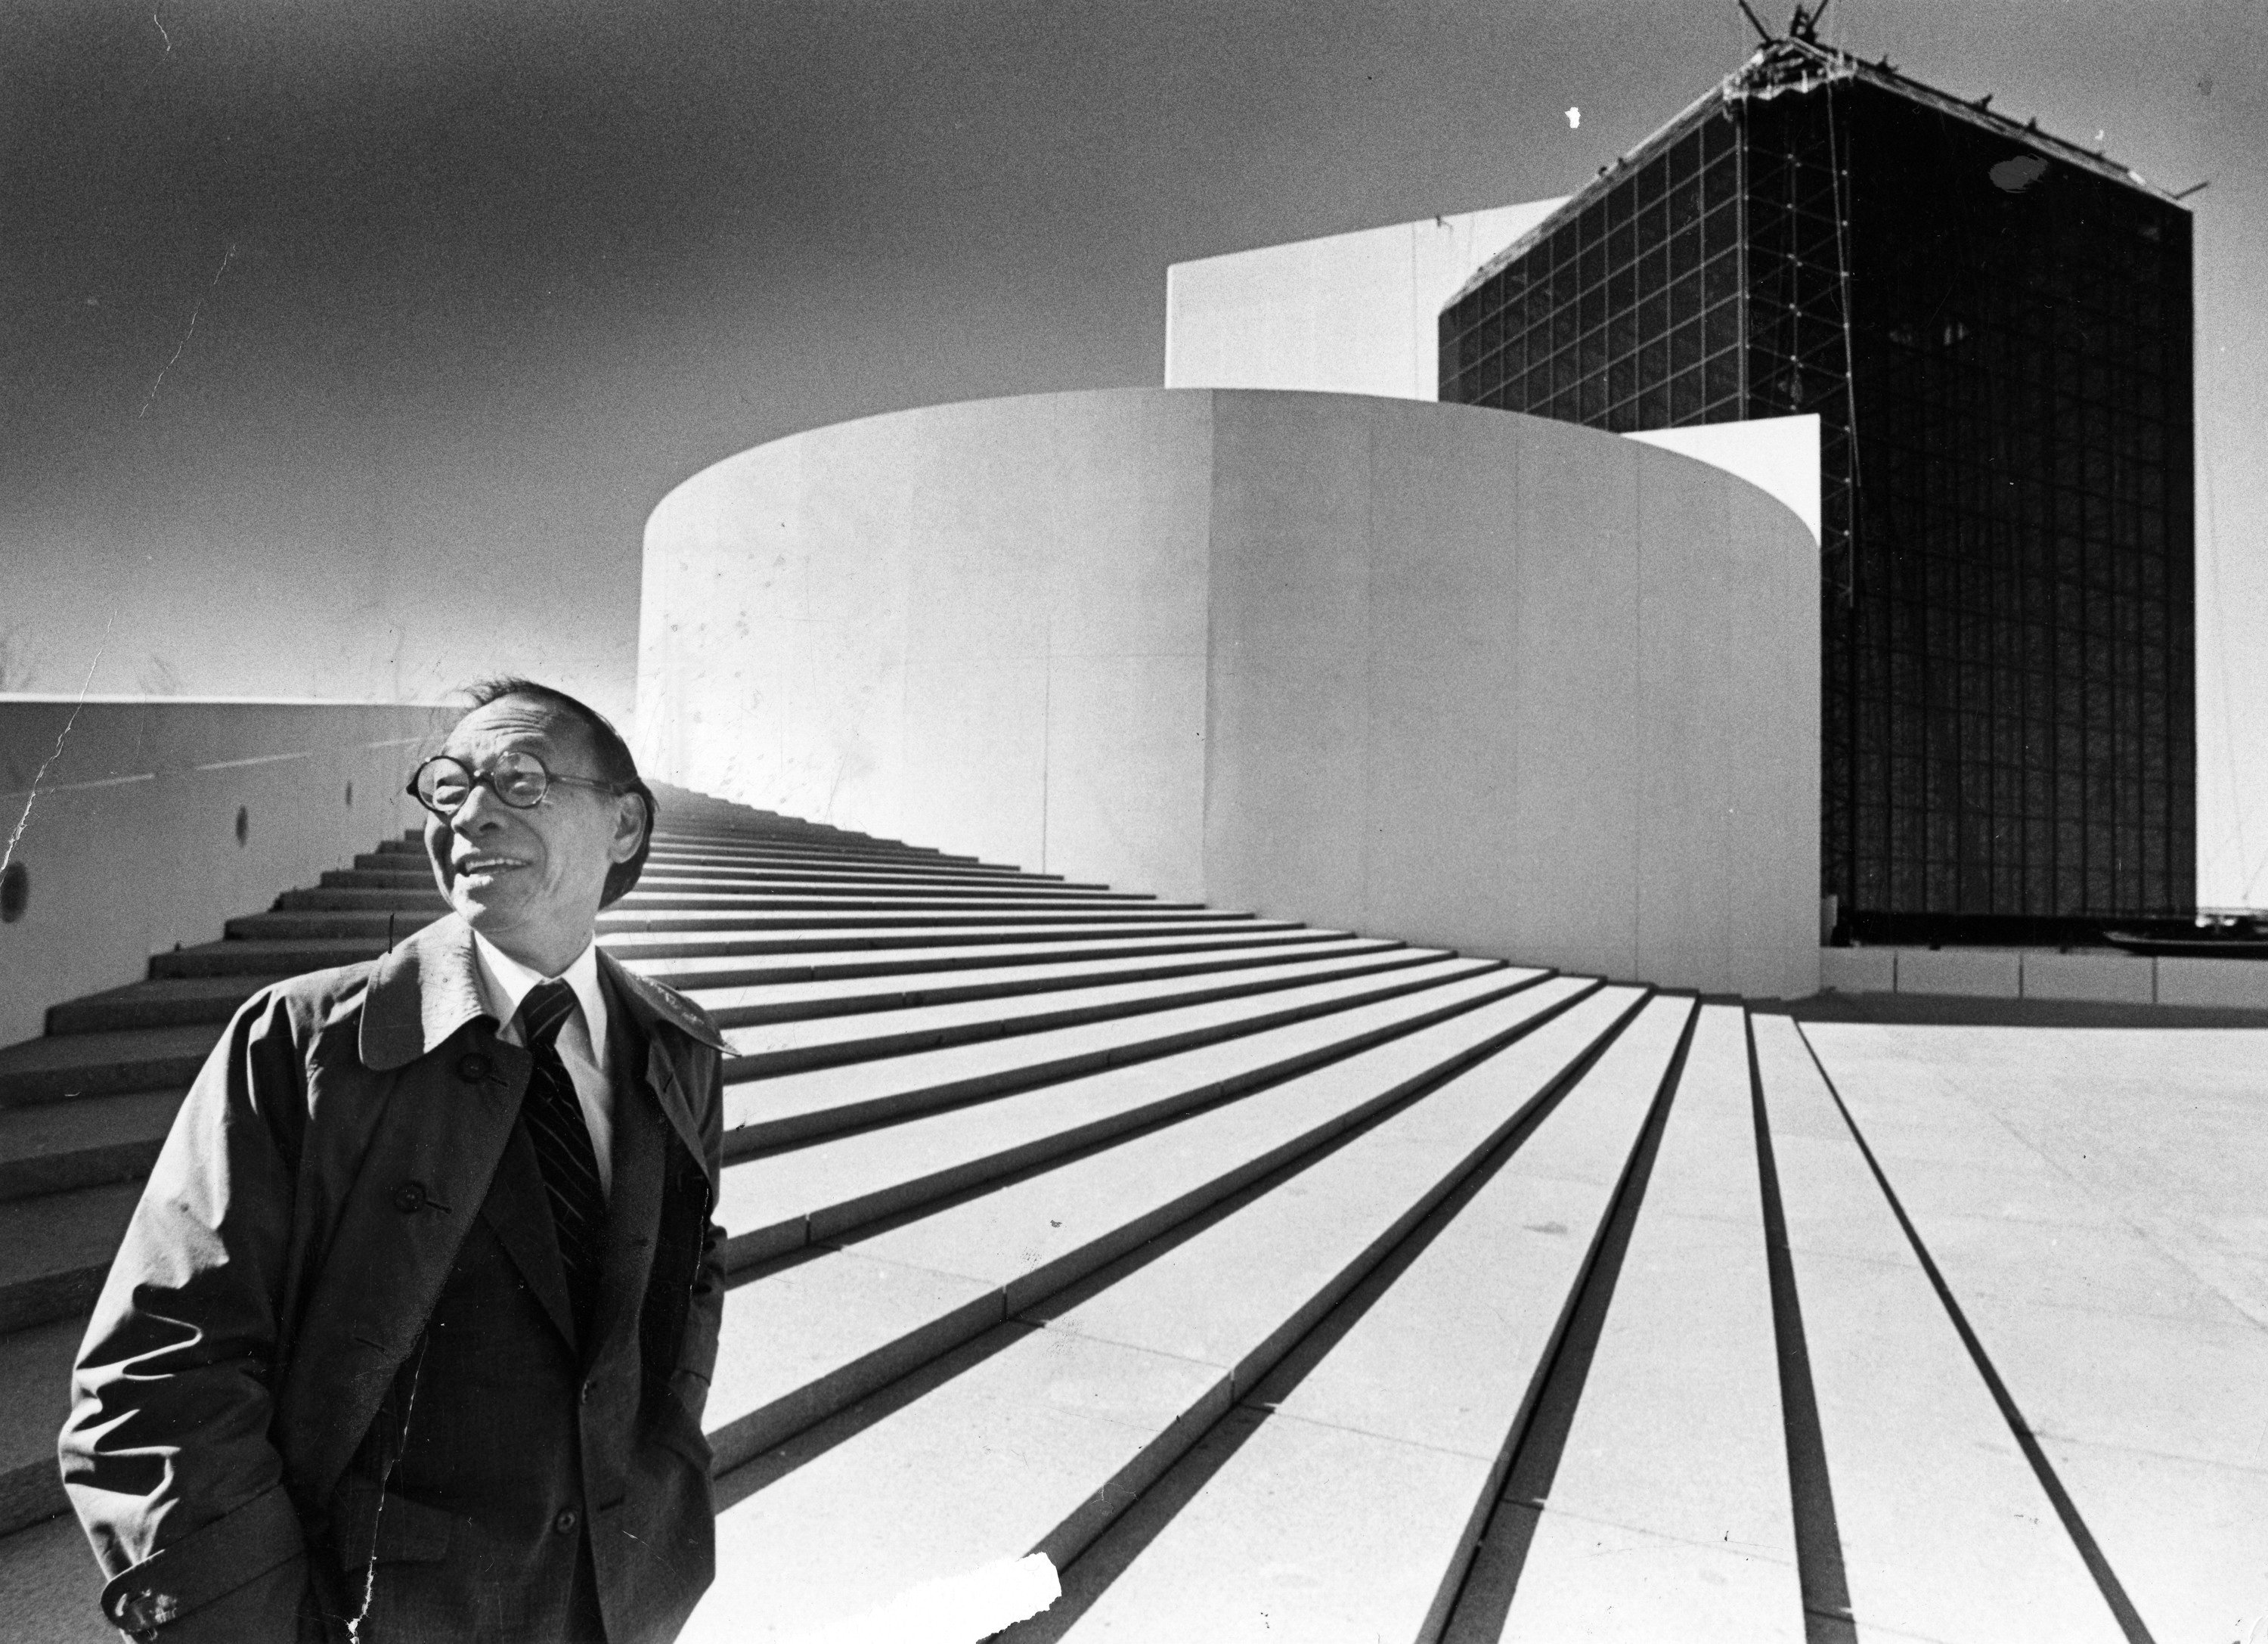 Chinese-born American architect I.M. Pei was one of the most important architects of recent decades, with key works around the globe including the John F. Kennedy Presidential Library and Museum in Boston, seen here in 1979. Photo: Getty Images